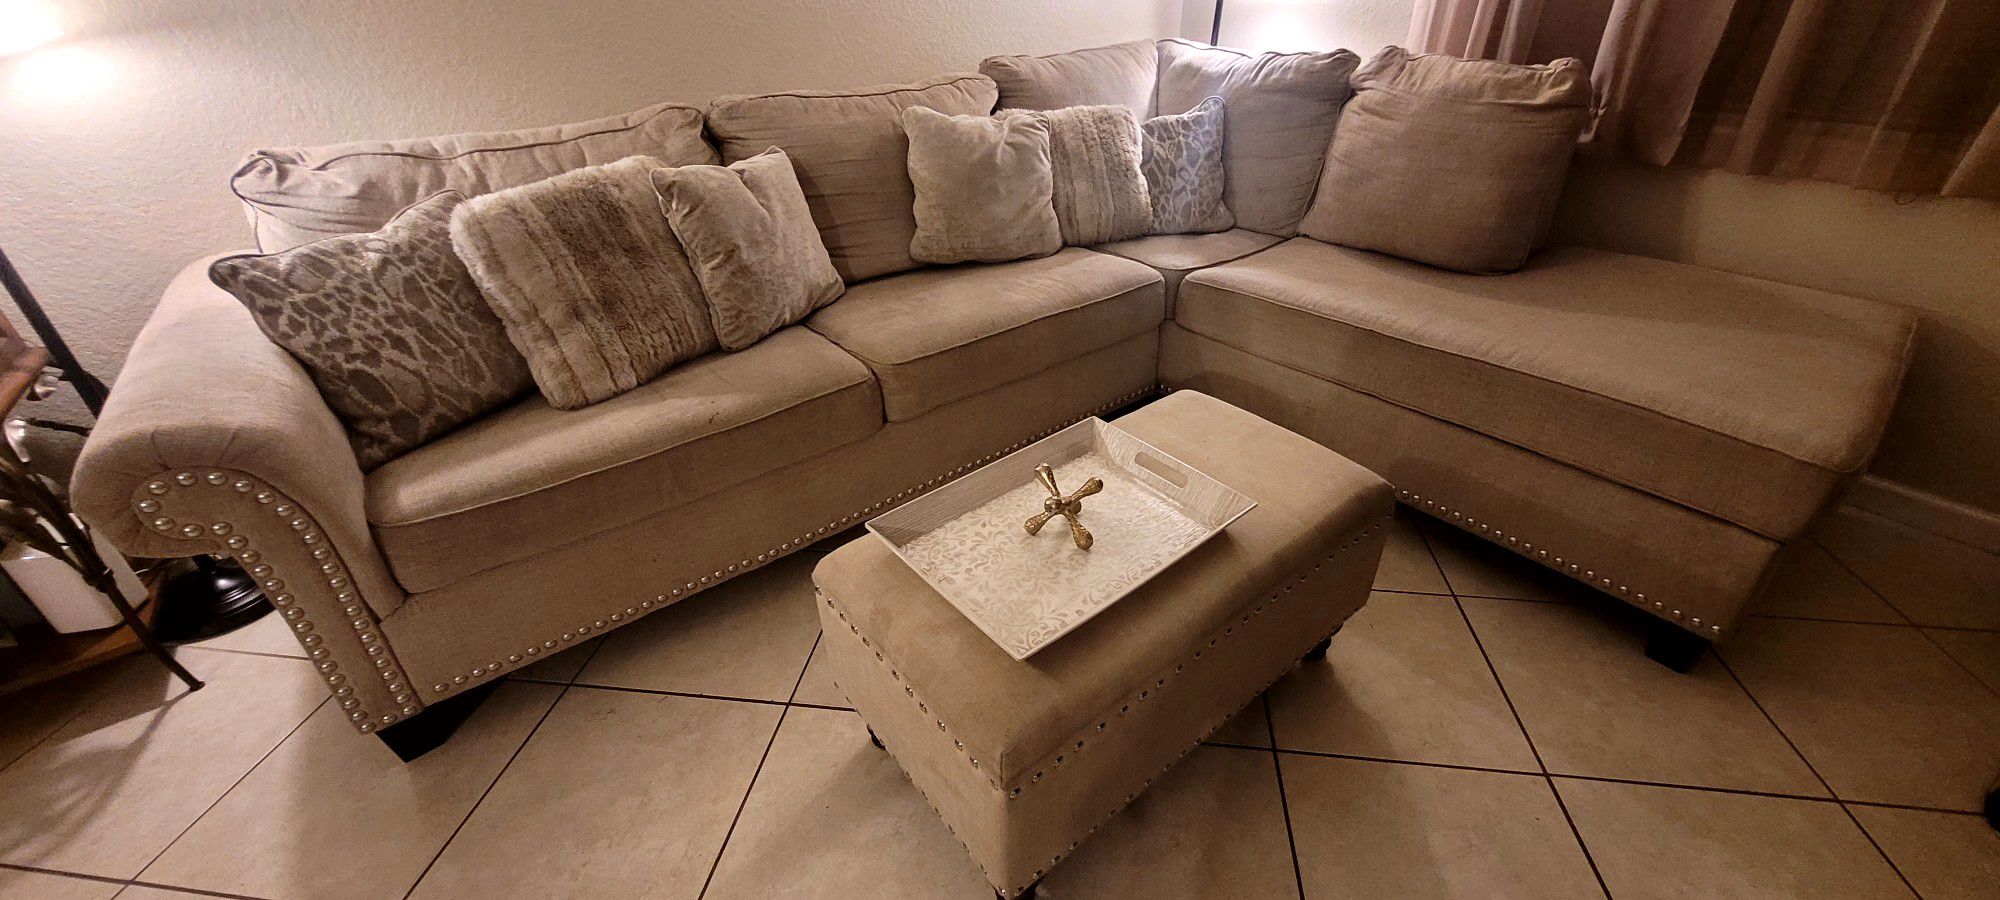 PRICE REDUCED! Beige Sectional Sofa For Sale!